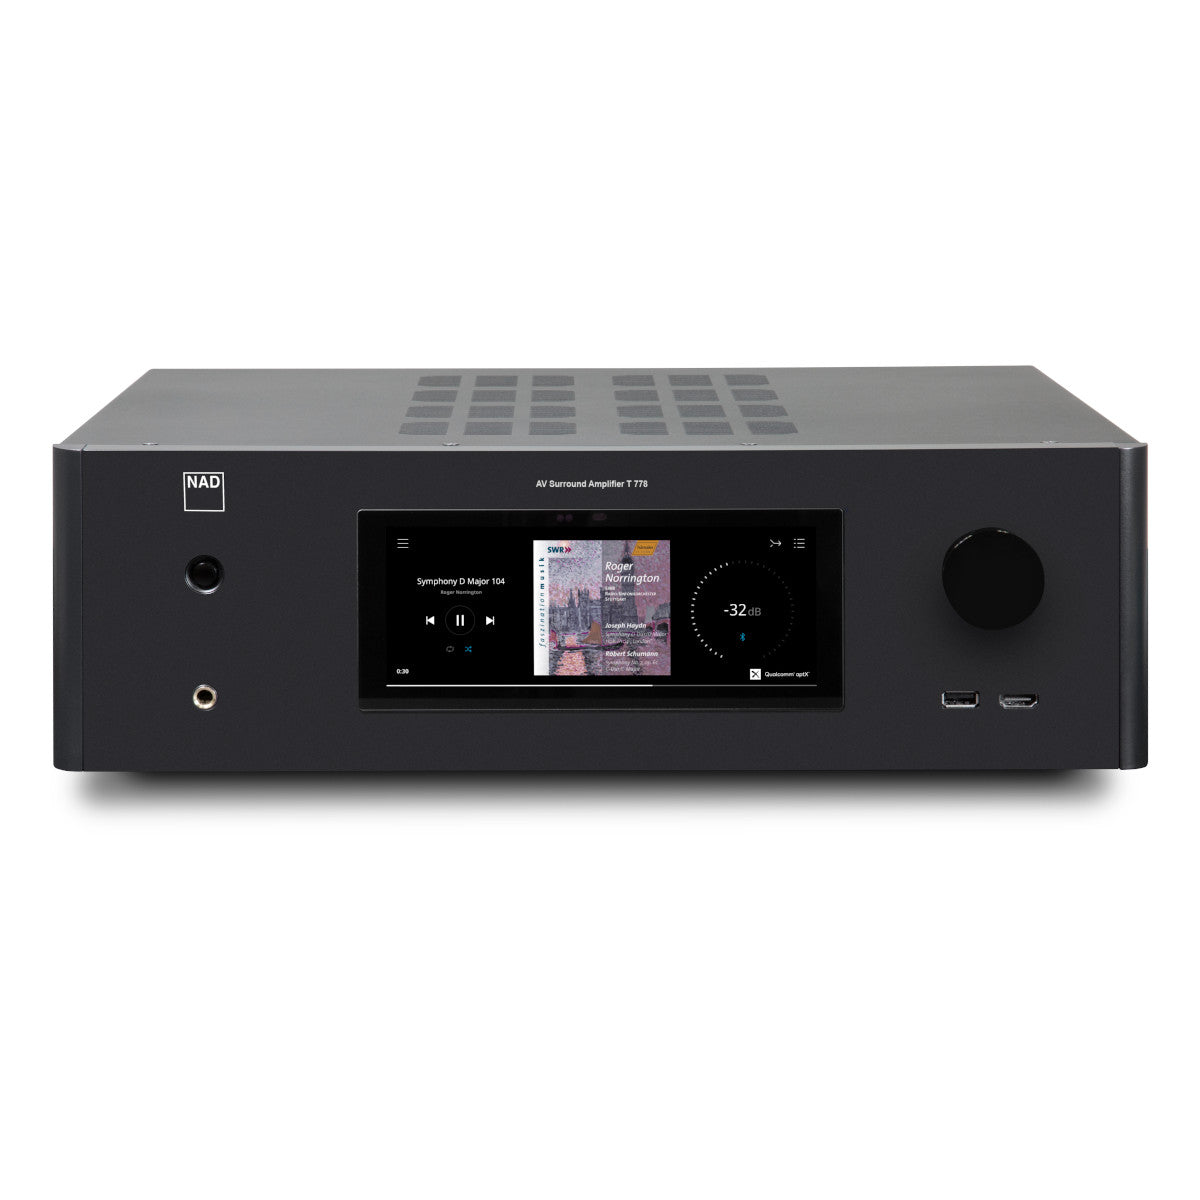 NAD Electronics T778 7.2.4 Channel Home Theater AV Receiver